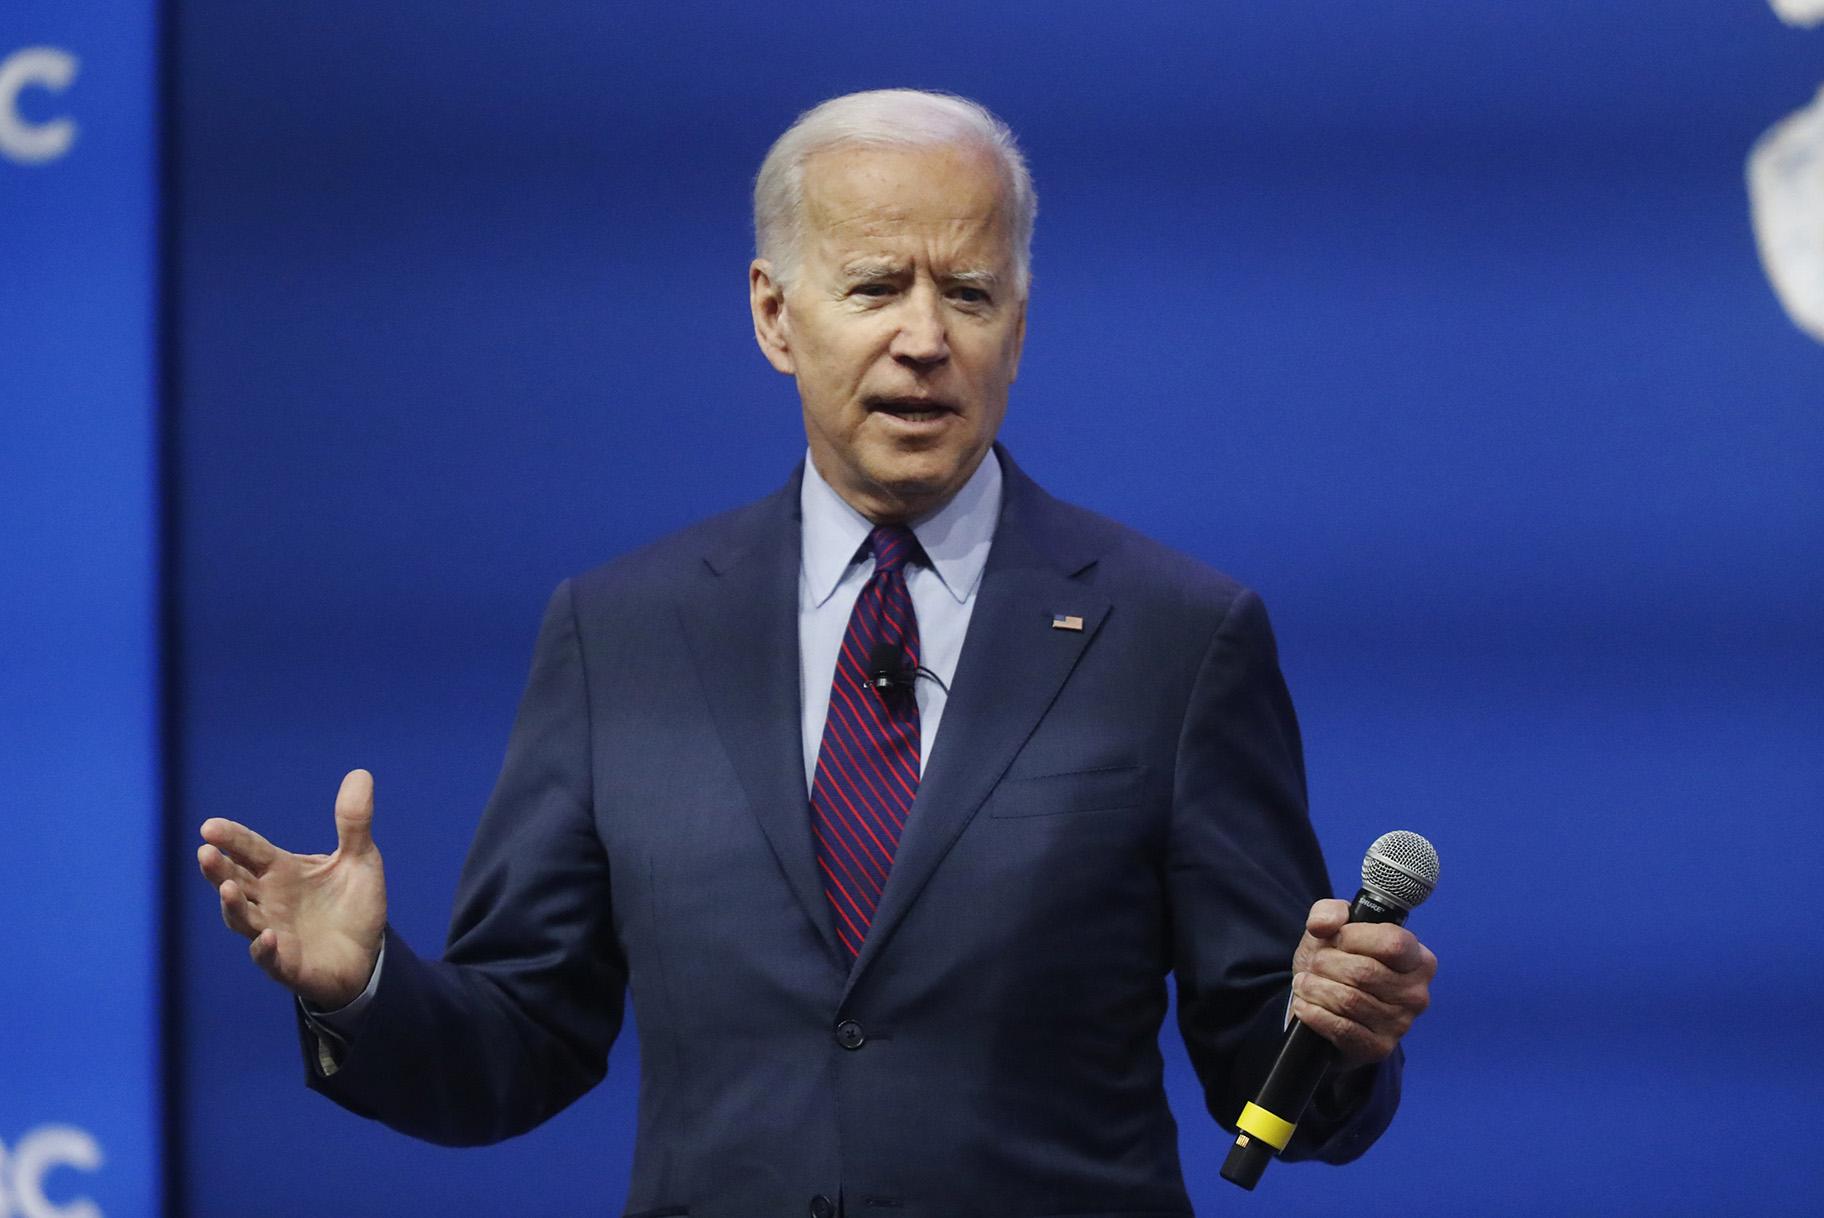 Democratic presidential candidate former Vice President Joe Biden, one of seven scheduled Democratic candidates participating in a public education forum, makes opening remarks, Saturday, Dec. 14, 2019, in Pittsburgh (AP Photo / Keith Srakocic)